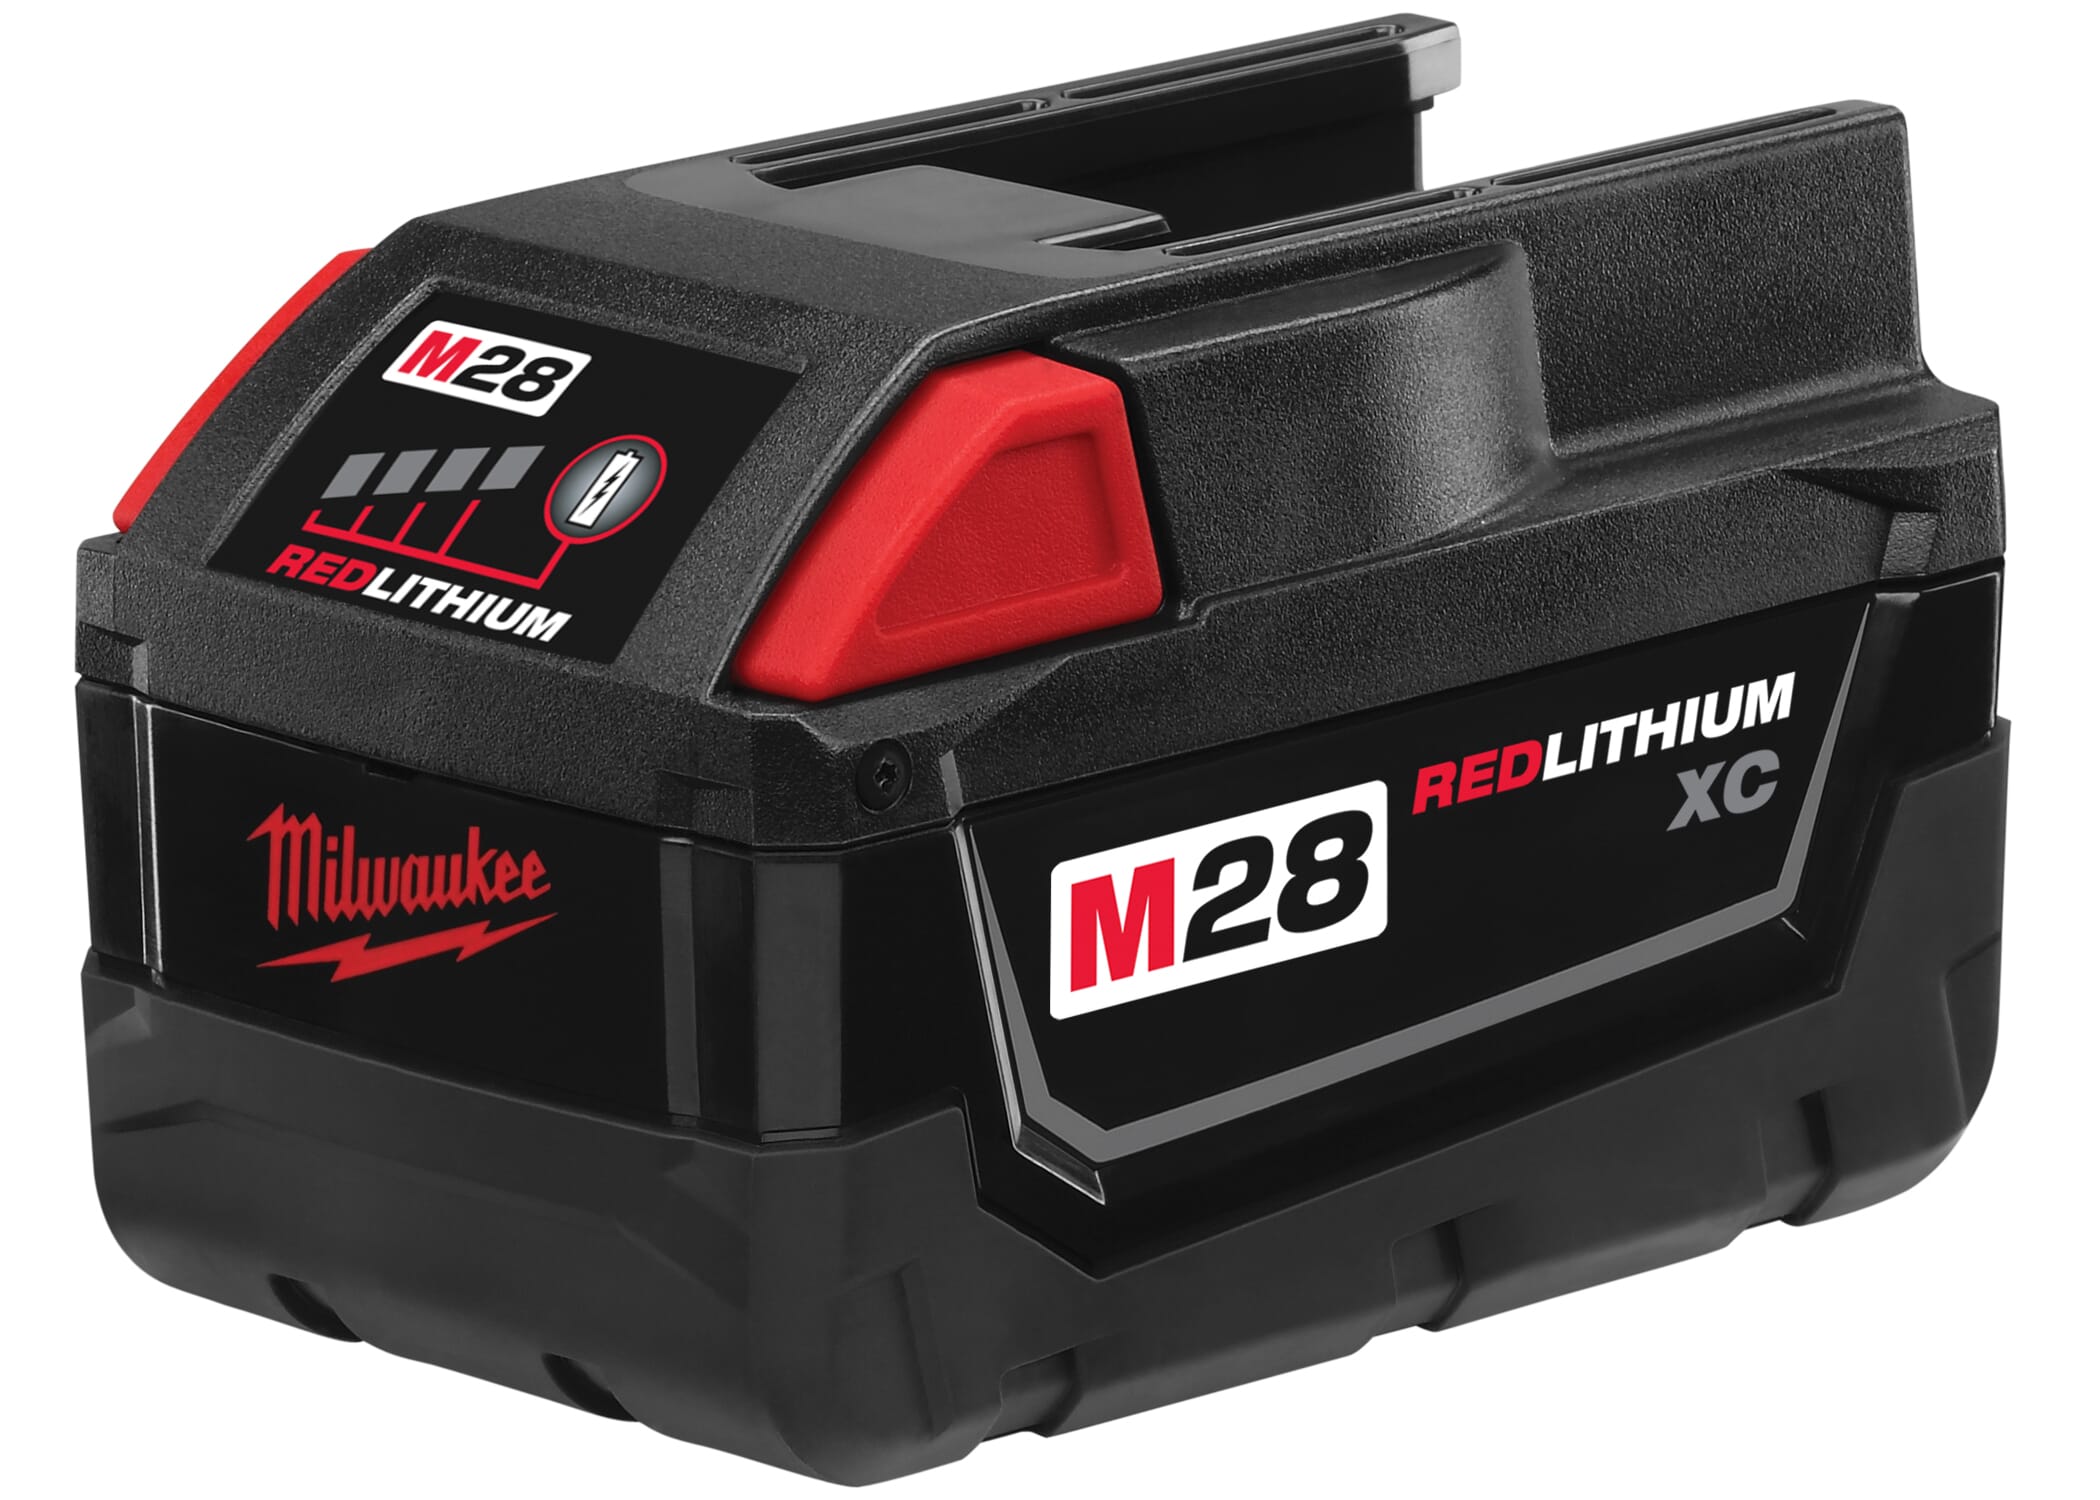 Milwaukee® 48-11-2830 Rechargeable Cordless Battery Pack, 3 Ah Lithium-Ion Battery, 28 VDC Charge, For Use With M28™ and V28™ Cordless Power Tool